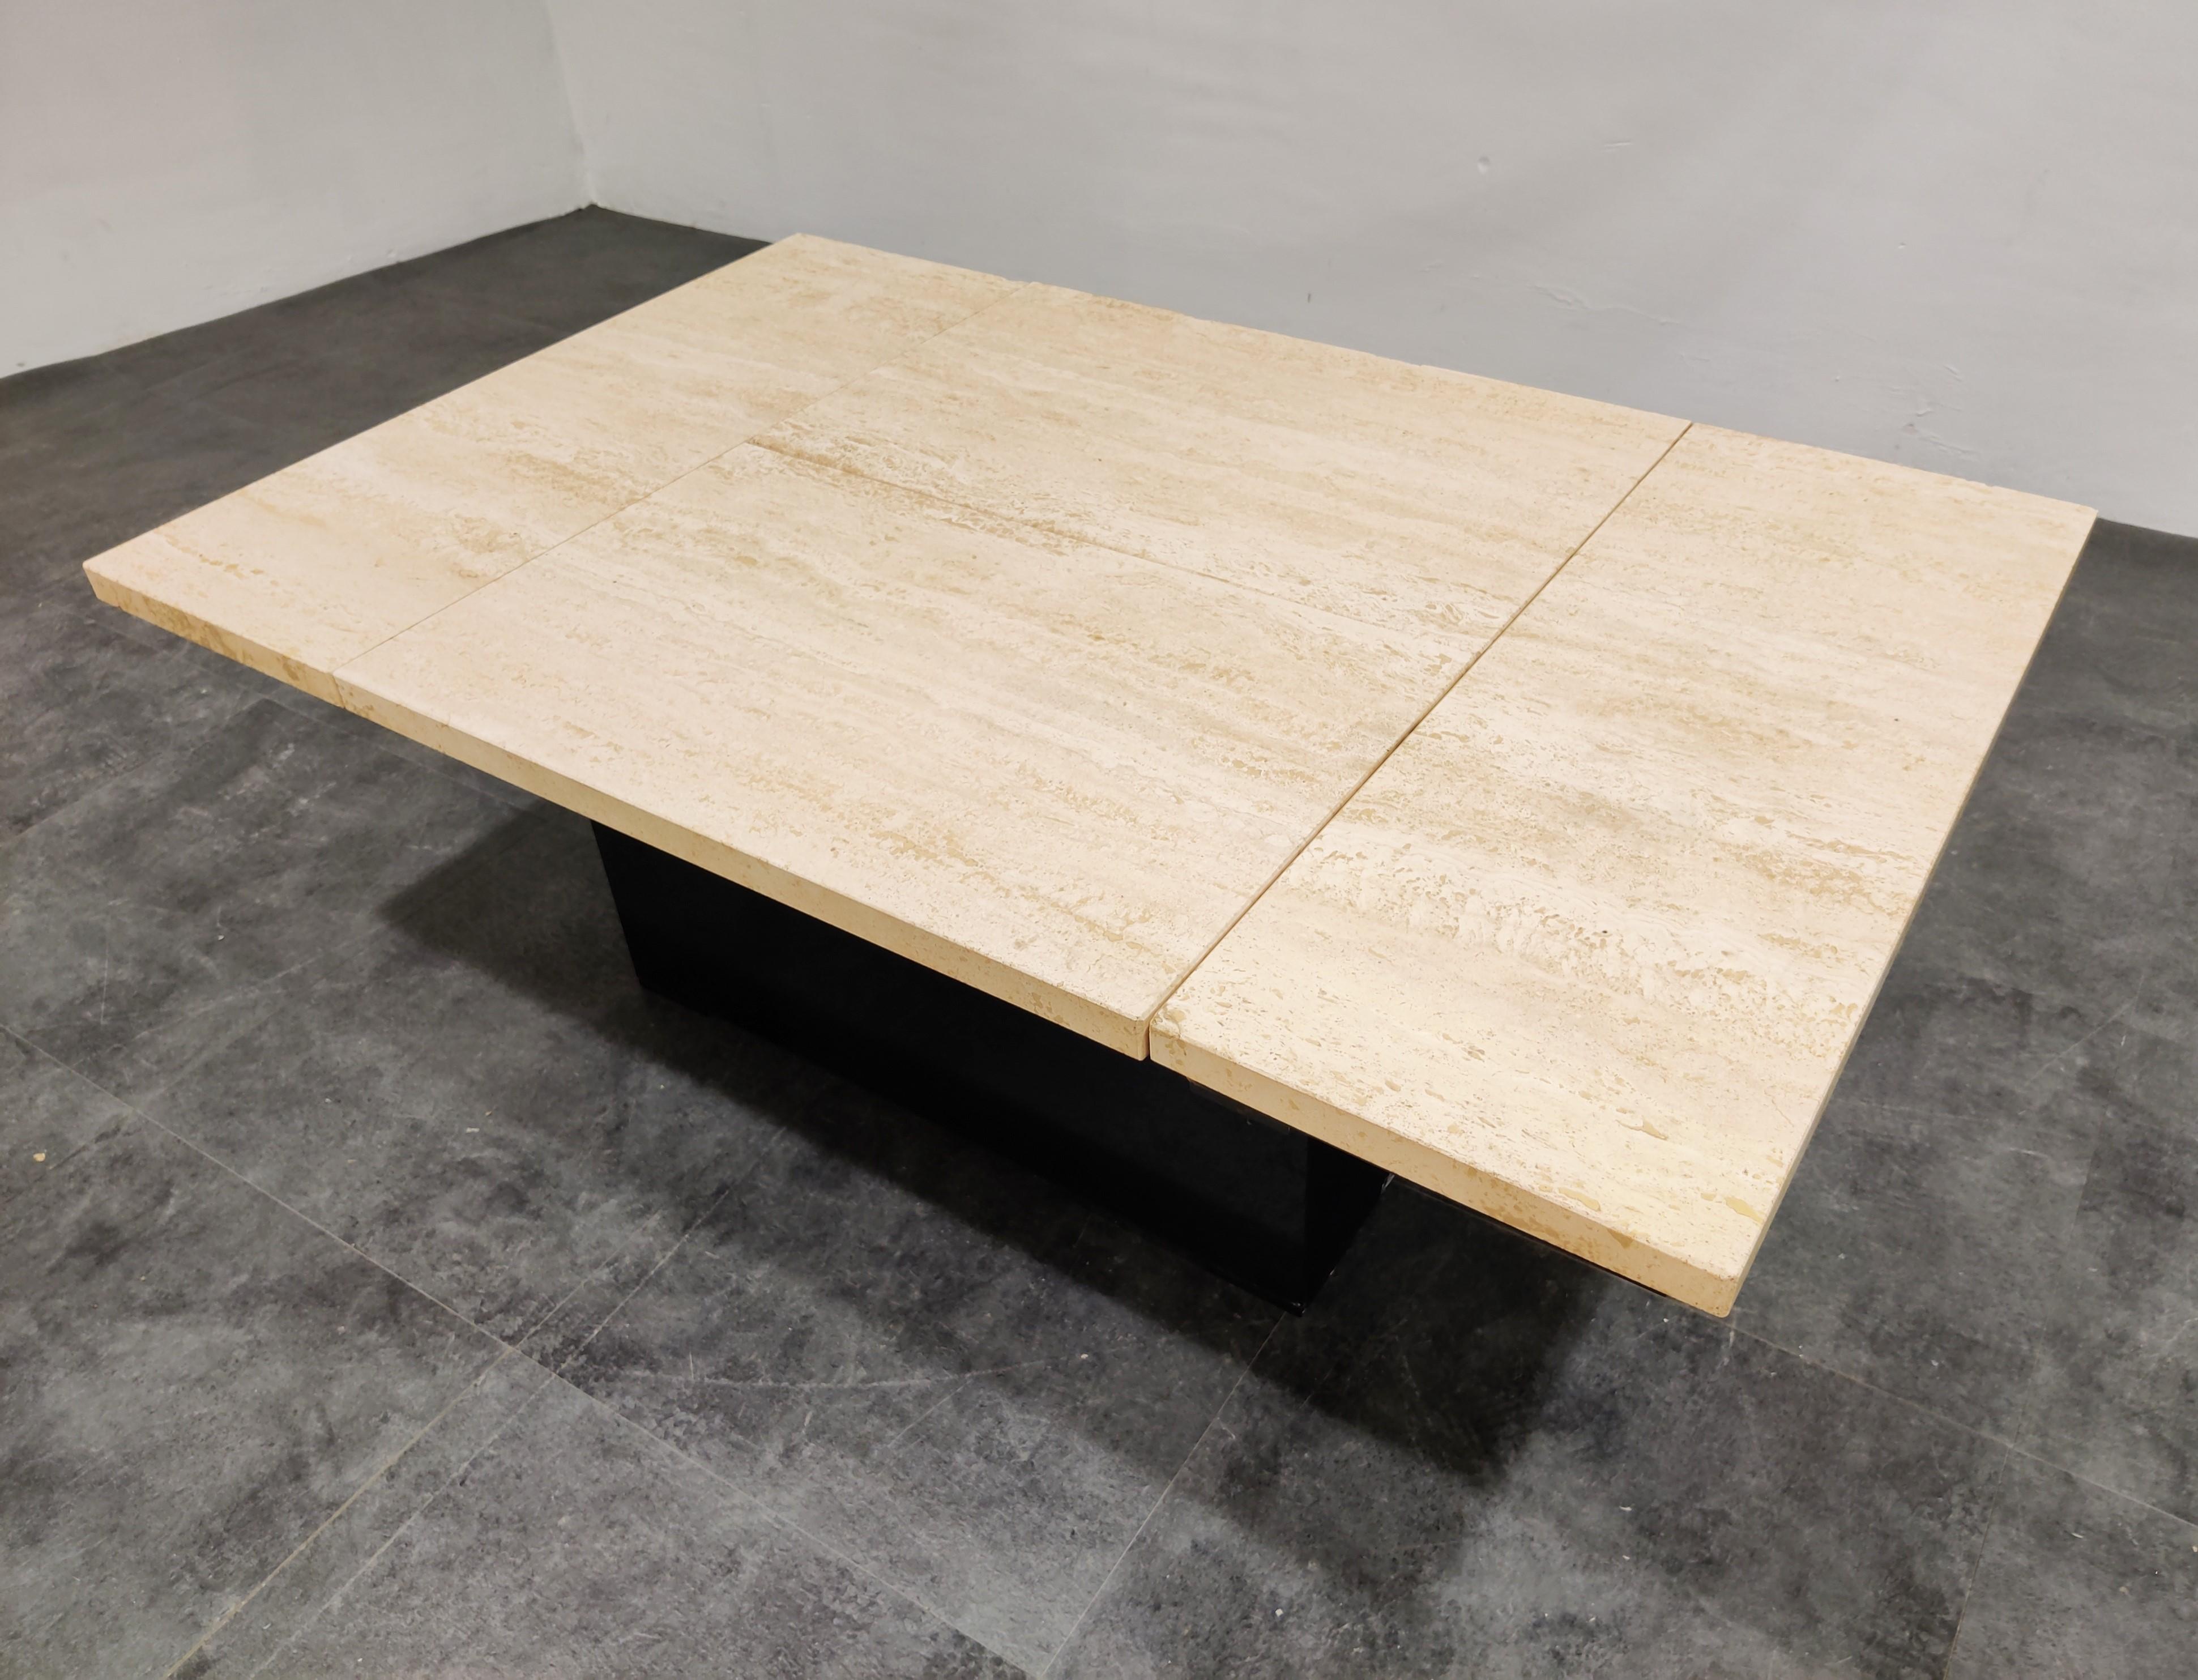 Vintage travertine hidden bar coffee table in the style of Willy Rizzo.

With the top closed it looks like a regular coffee table, but open it up and it reveals a mirrored storage space for glasses and bottles.

A great coffee table to add some